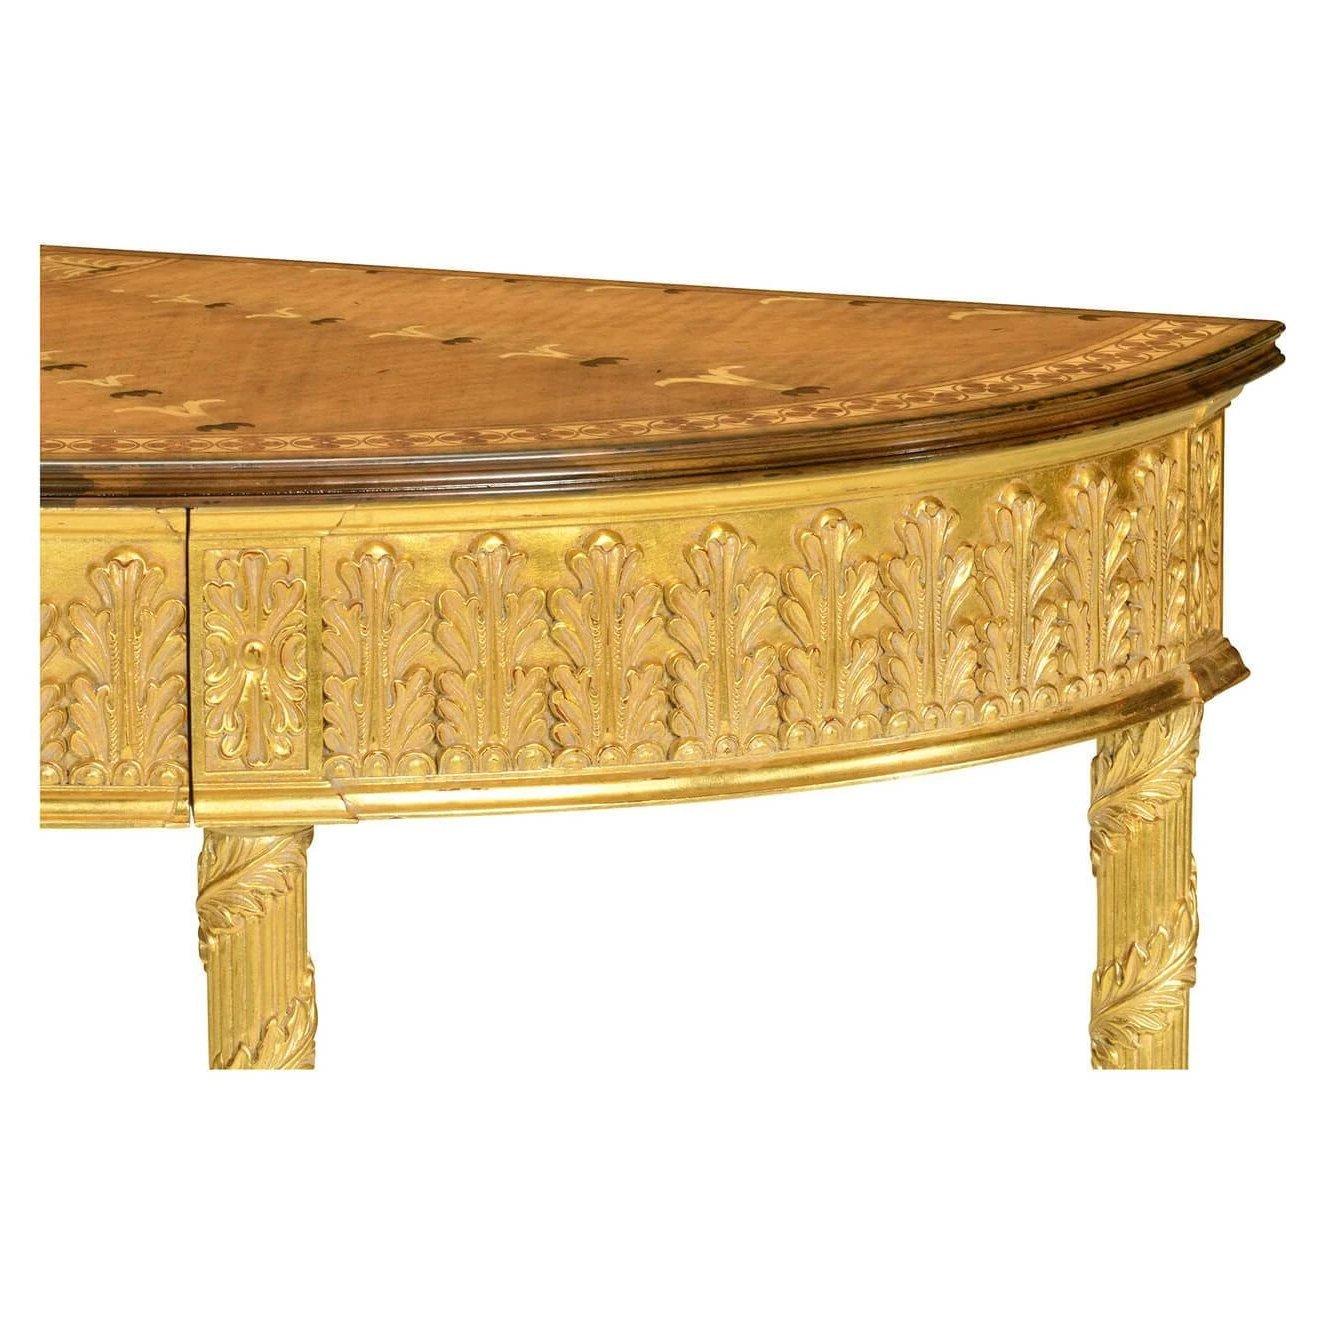 George III Adam neoclassical demilune console table with fine gilded acanthus leaves to the drawer and running up the legs, and a satinwood marquetry top inlaid with floral motifs. After an original of circa 1780.

Dimensions: 46.37